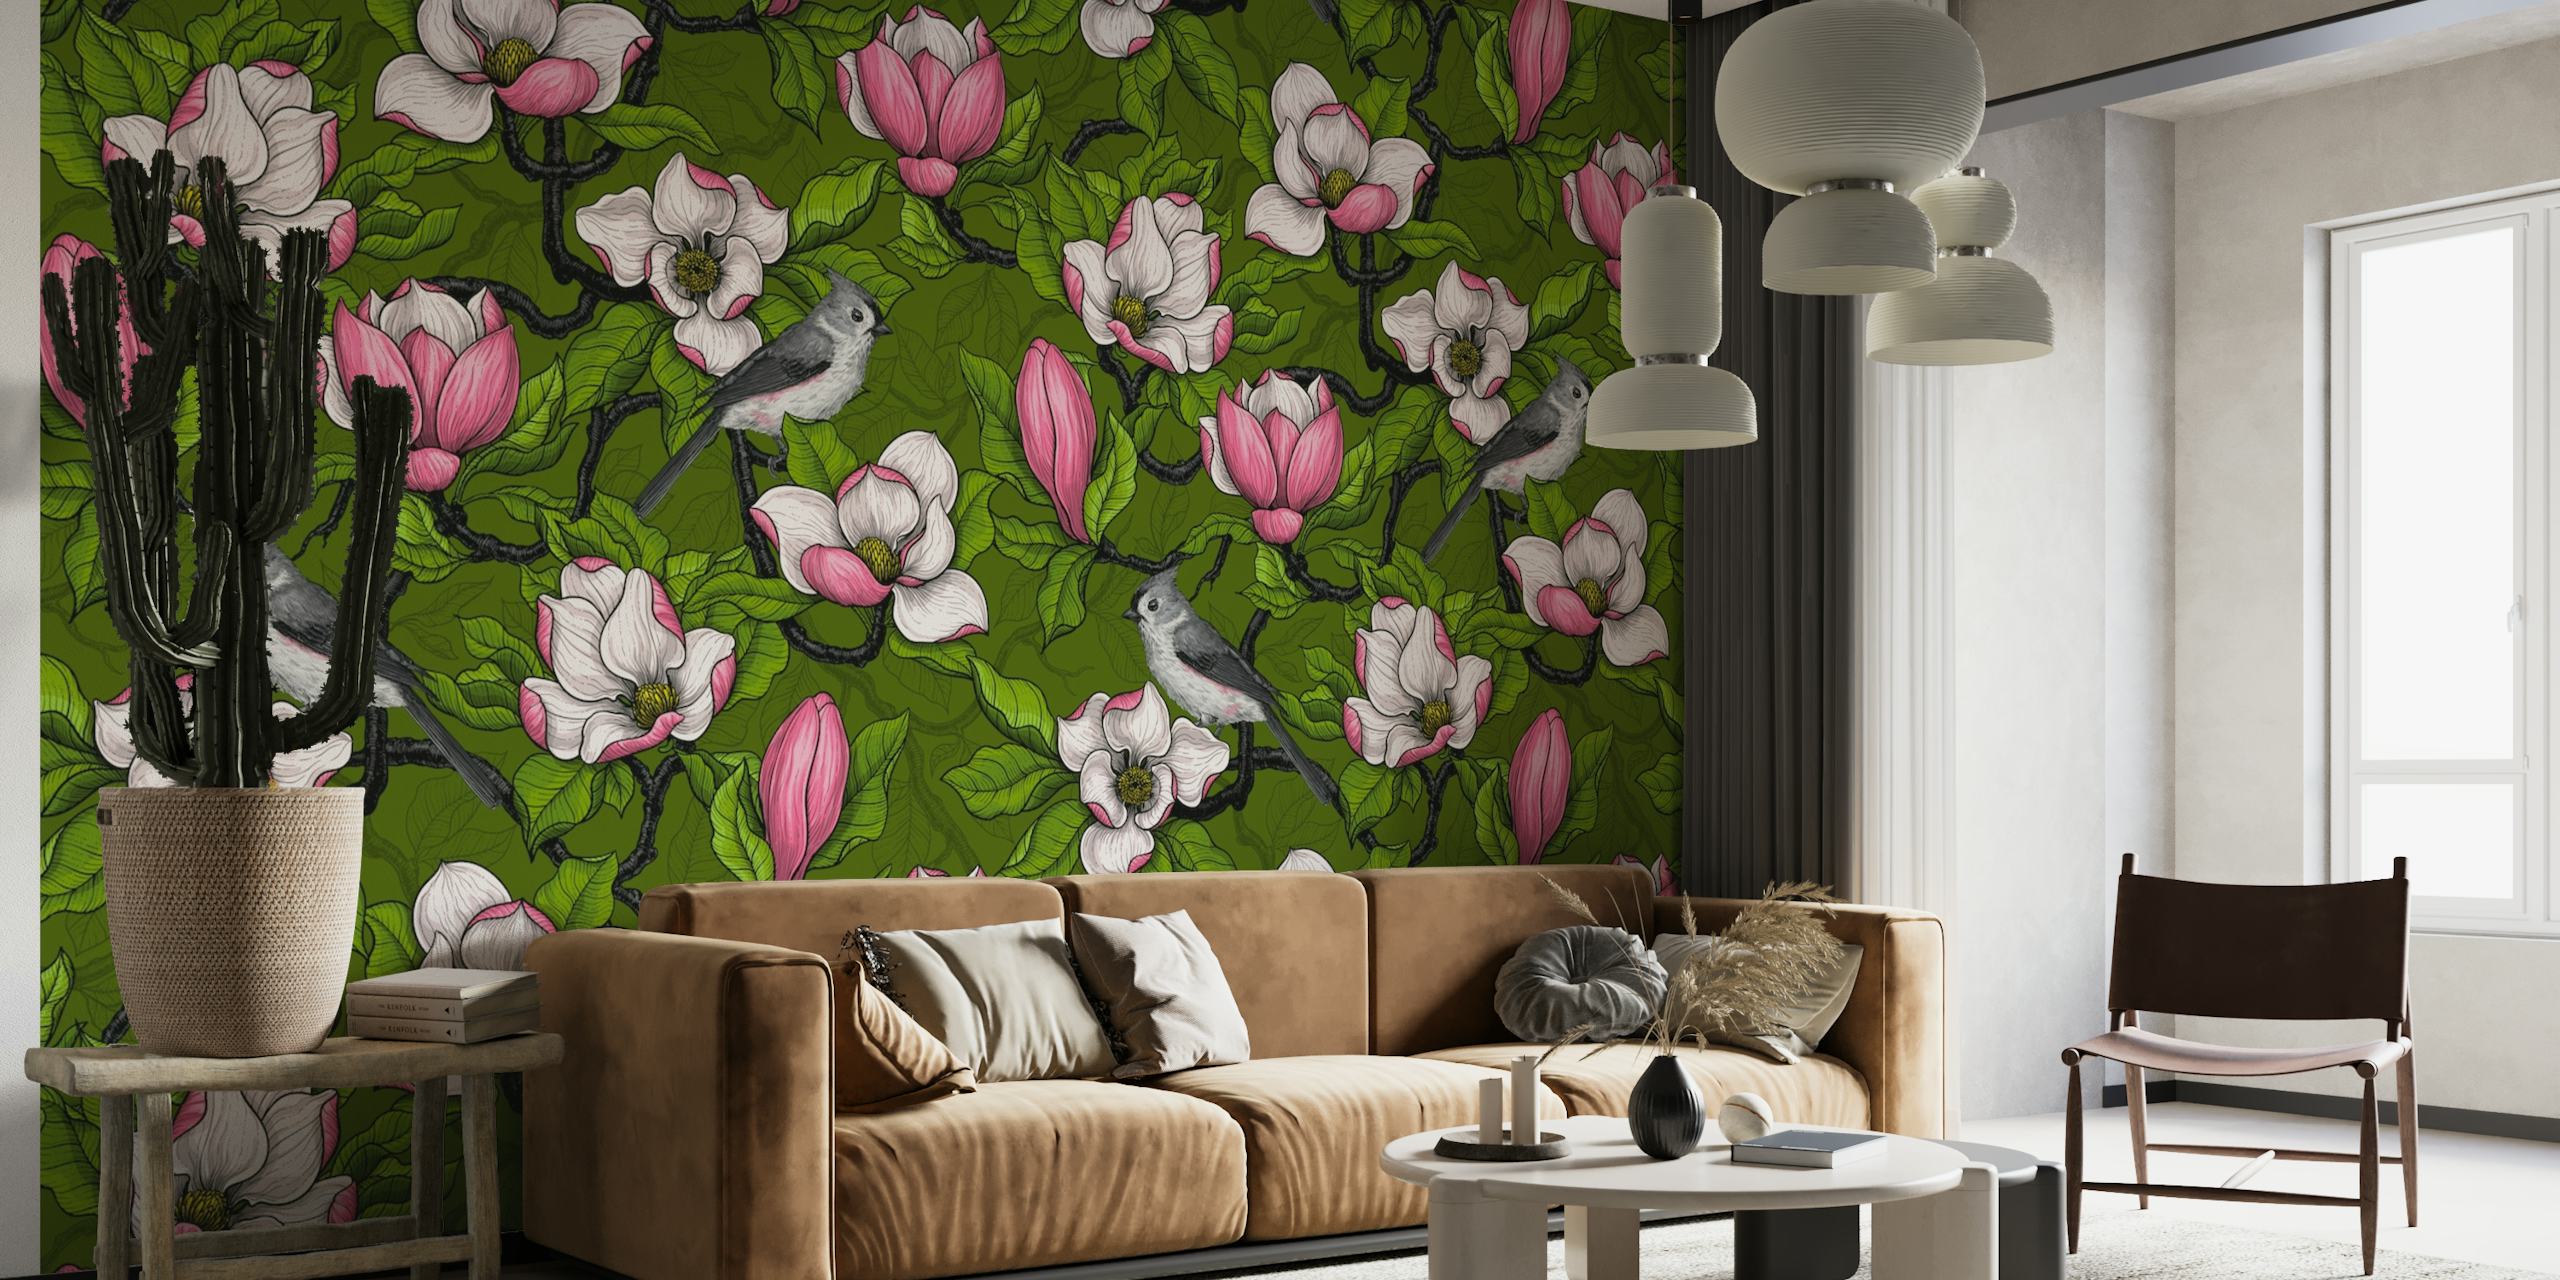 Blooming magnolia flowers with flying birds wall mural